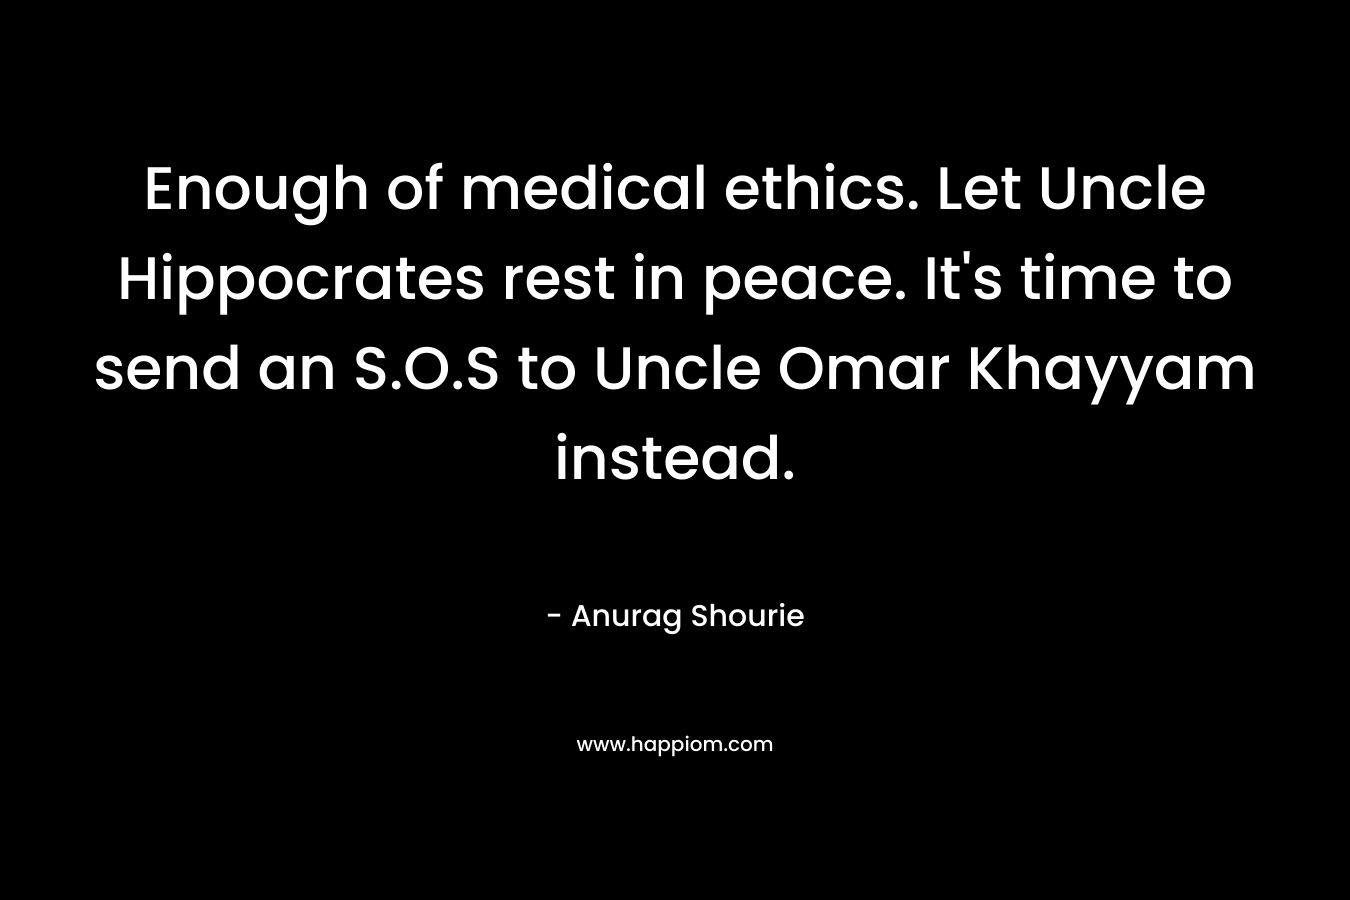 Enough of medical ethics. Let Uncle Hippocrates rest in peace. It's time to send an S.O.S to Uncle Omar Khayyam instead.